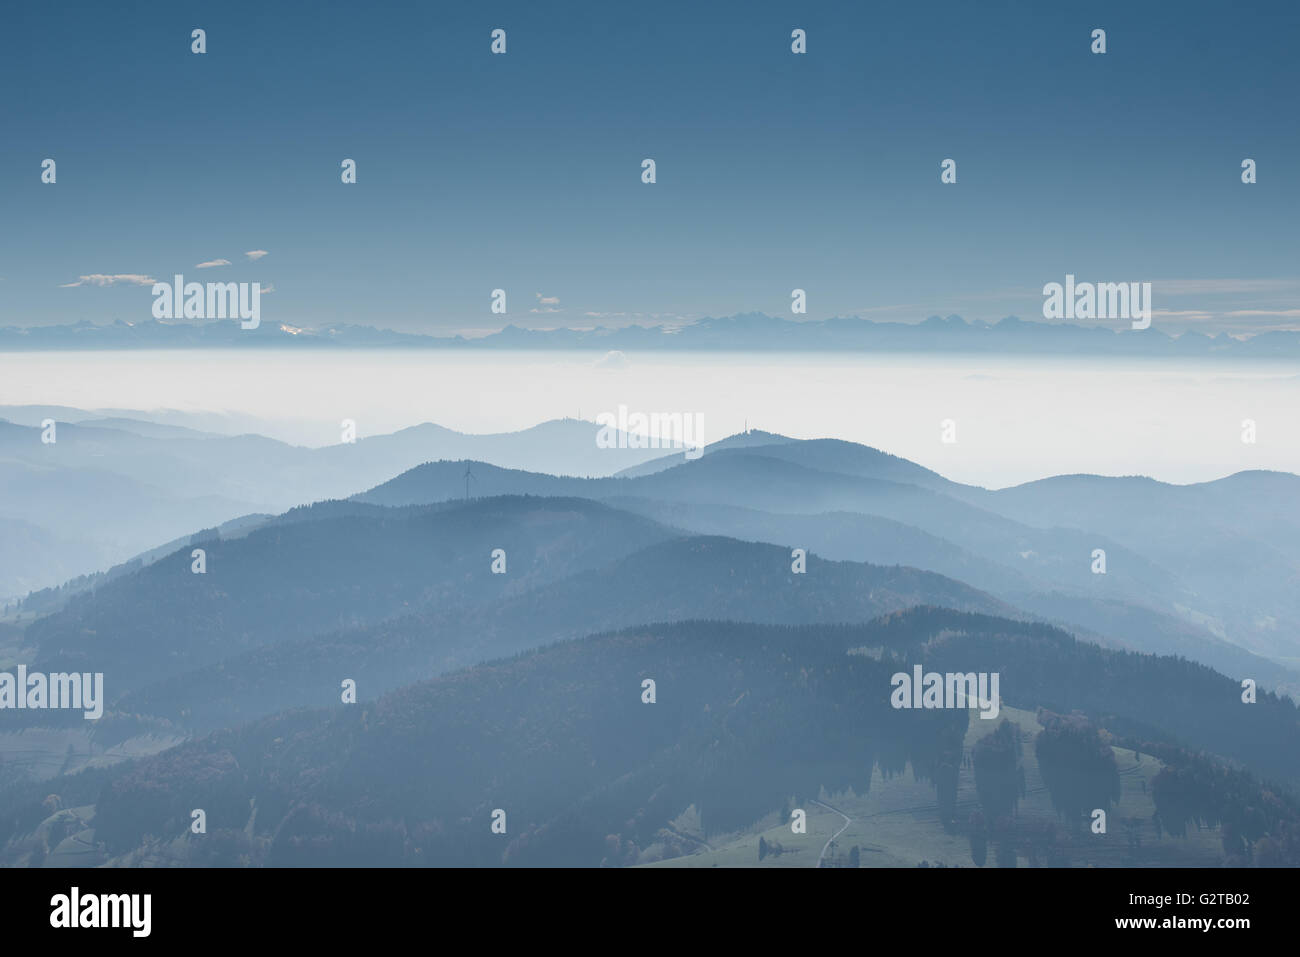 27.10.2015, Schoenau im Schwarzwald, Baden-Wuerttemberg, Germany - View from Belchen towards the Swiss Alps. 00K151029D474CAROEX.JPG - NOT for SALE in G E R M A N Y, A U S T R I A, S W I T Z E R L A N D [MODEL RELEASE: NOT APPLICABLE, PROPERTY RELEASE: NO, (c) caro photo agency / Kaiser, http://www.caro-images.com, info@carofoto.pl - Any use of this picture is subject to royalty!] Stock Photo